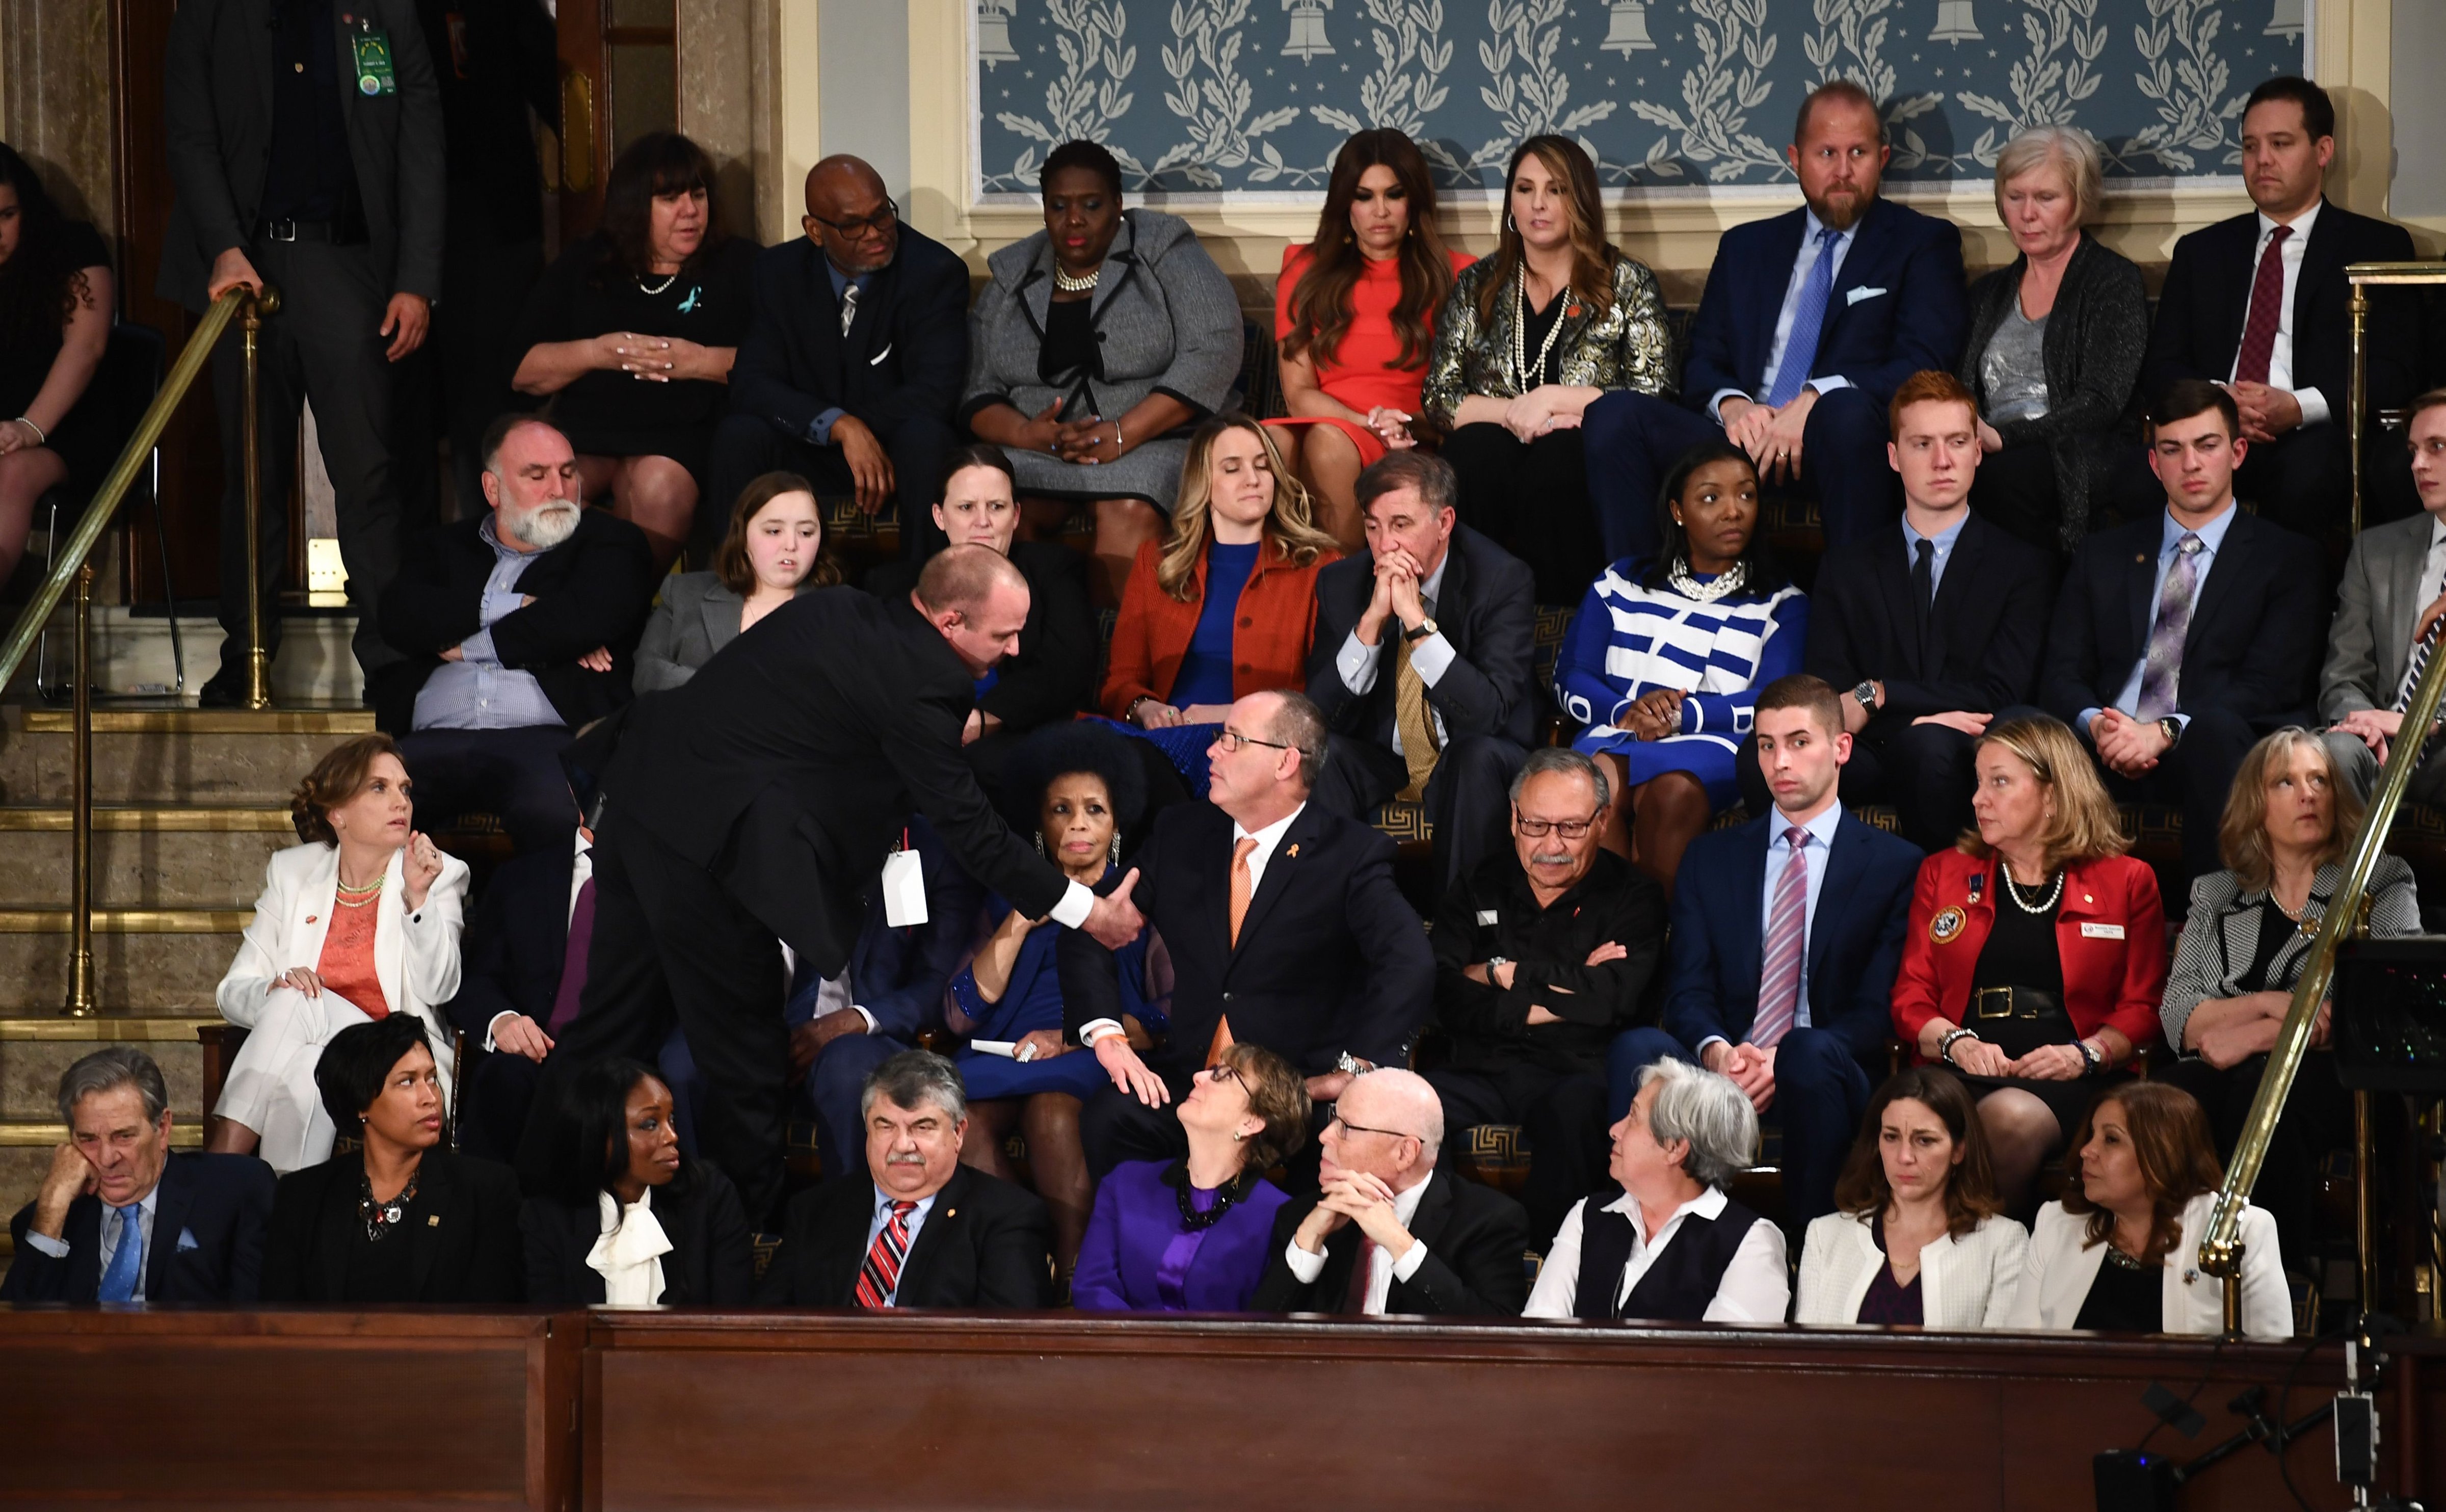 Fred Guttenberg is removed by security after yelling as President Trump delivered the State of the Union address at the US Capitol in Washington, D.C on Feb. 4, 2020. (Brendan Smialowski—AFP/Getty Images))